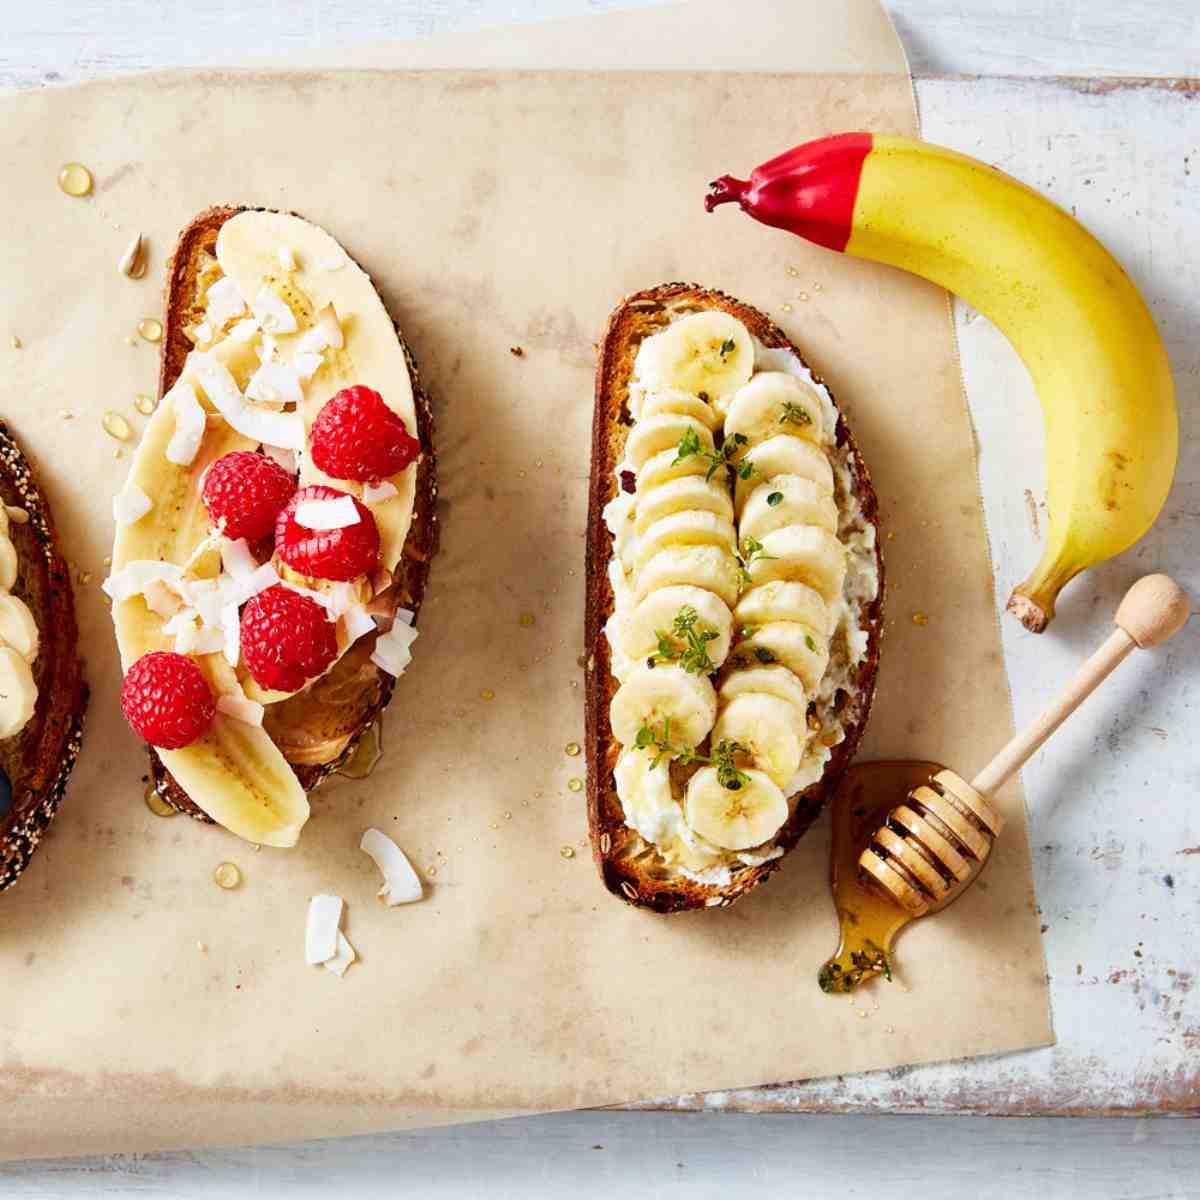 Toast topped with different fruit toppings such as coconut, bananas, honey and raspberries.